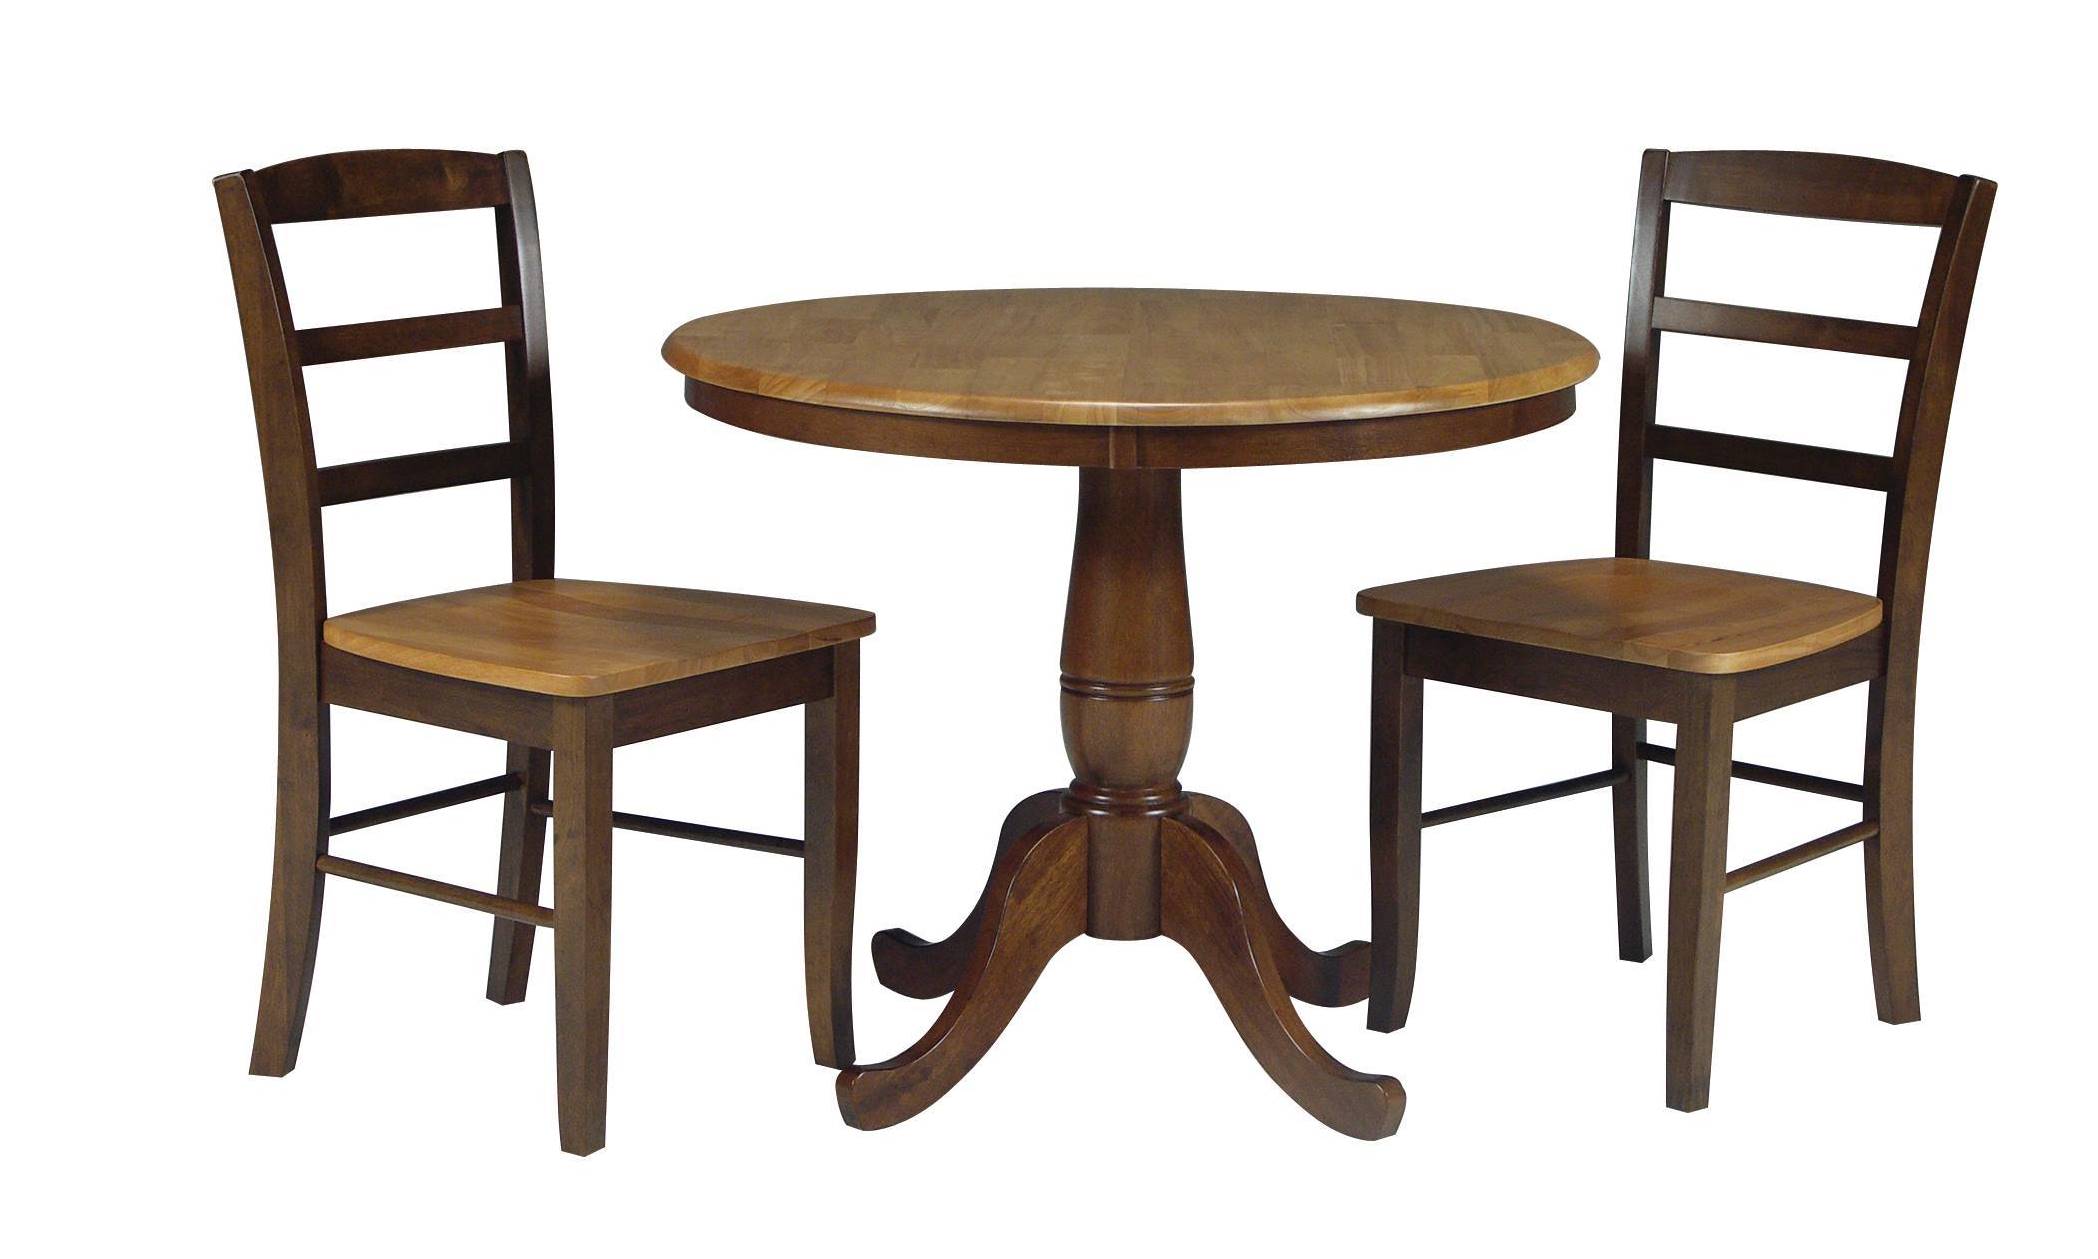 [36 Inch] Classic Round Table - Cinammon & Espresso with Madrid chairs